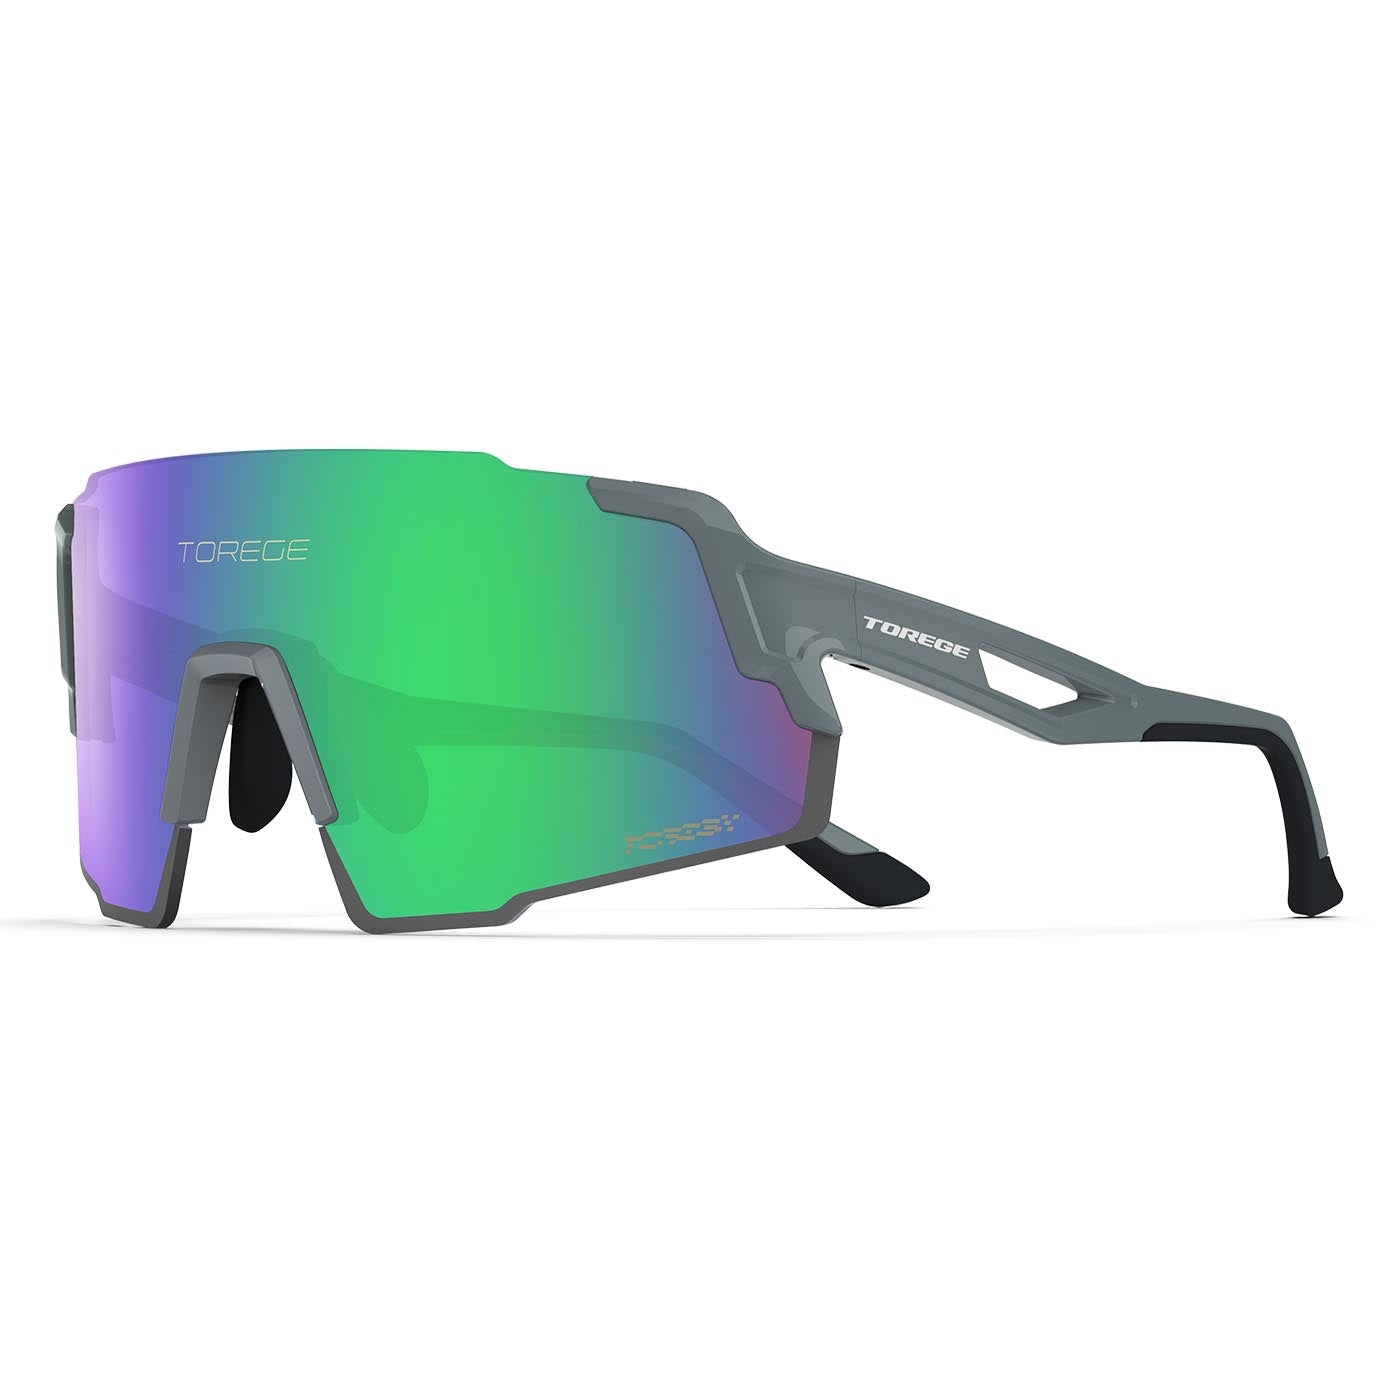 Reef Ice Ultra Lightweight Sports Sunglasses for Men & Women with Lifetime Warranty- Perfect for Cycling, Hiking, Fishing, Golf, and Running - Matte